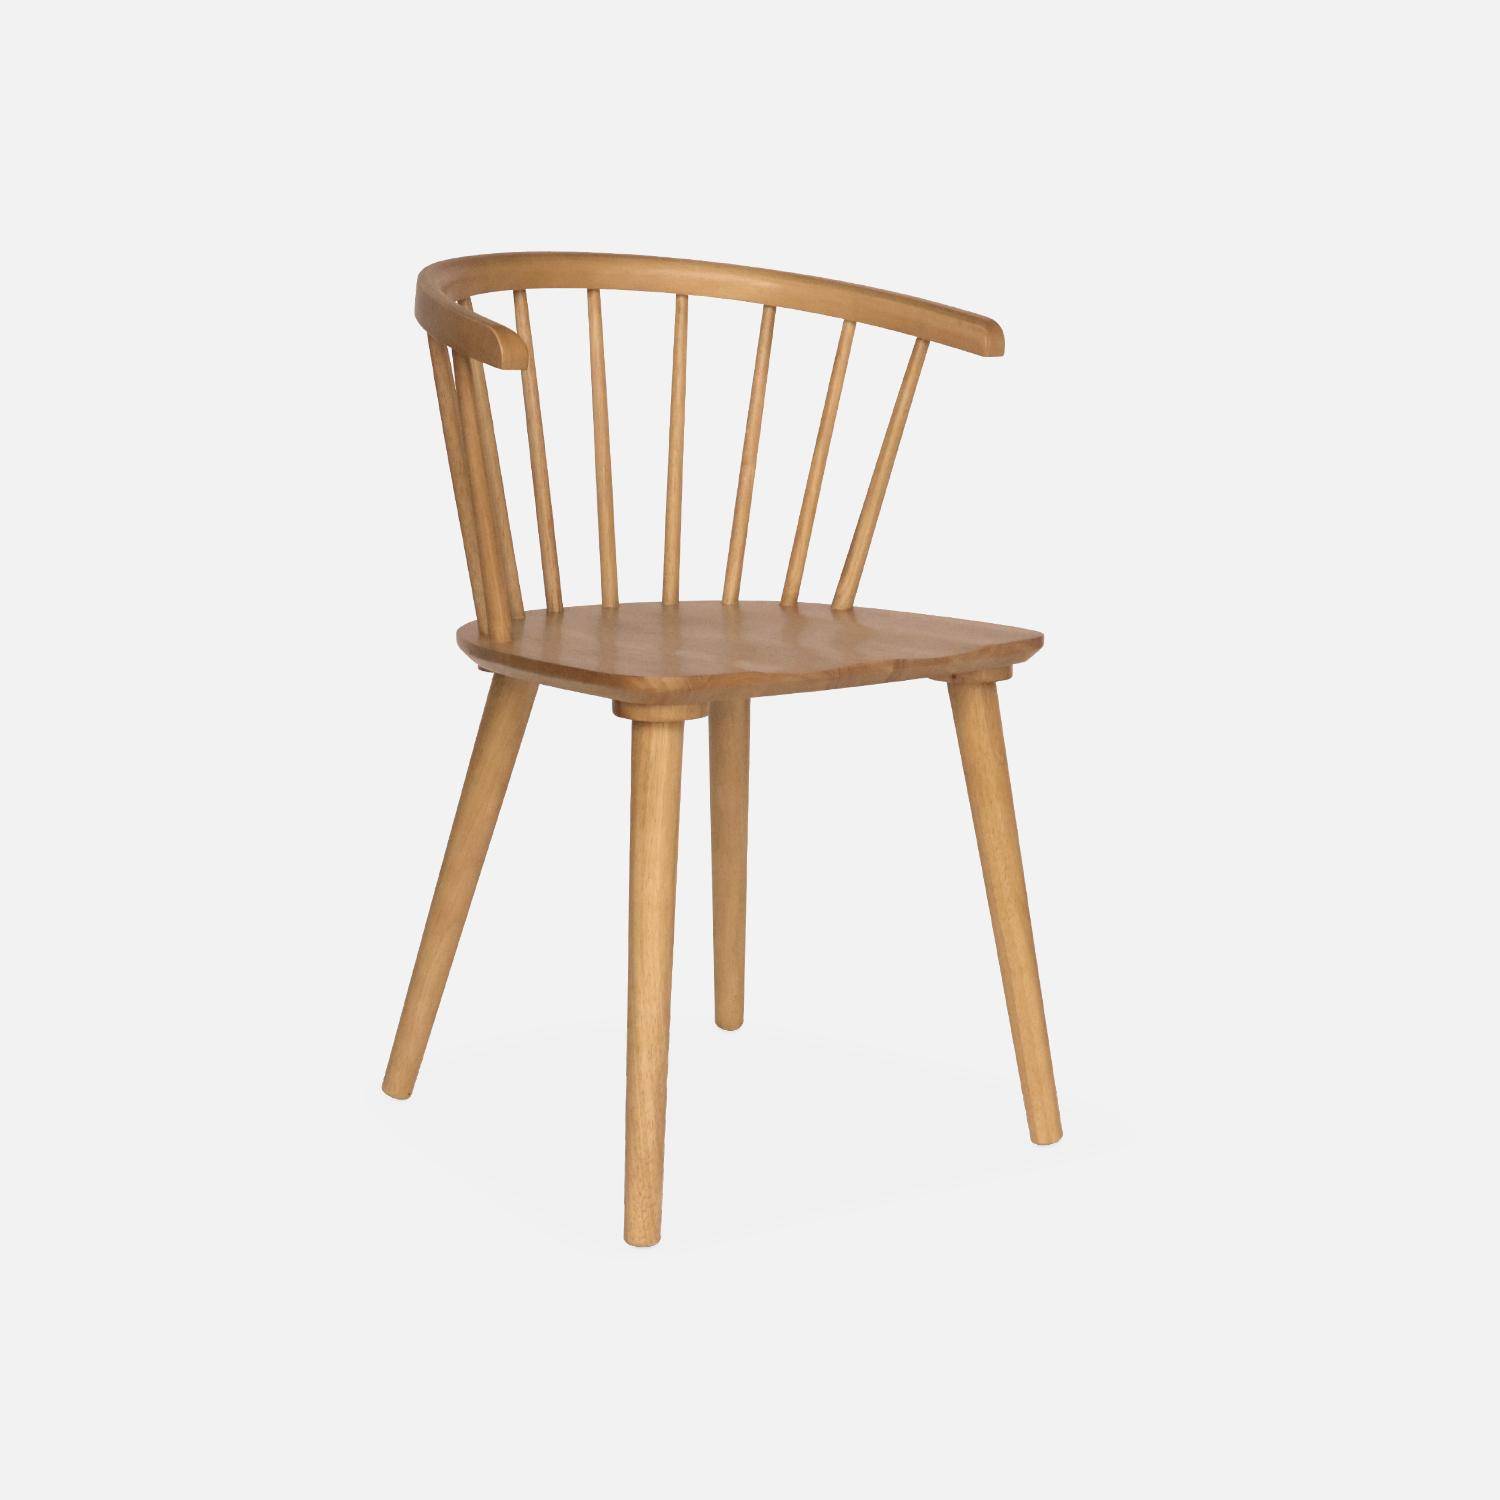 Pair of  Wood and Plywood Spindle Chairs, natural, L53 x W47.5 x H76cm  Photo6